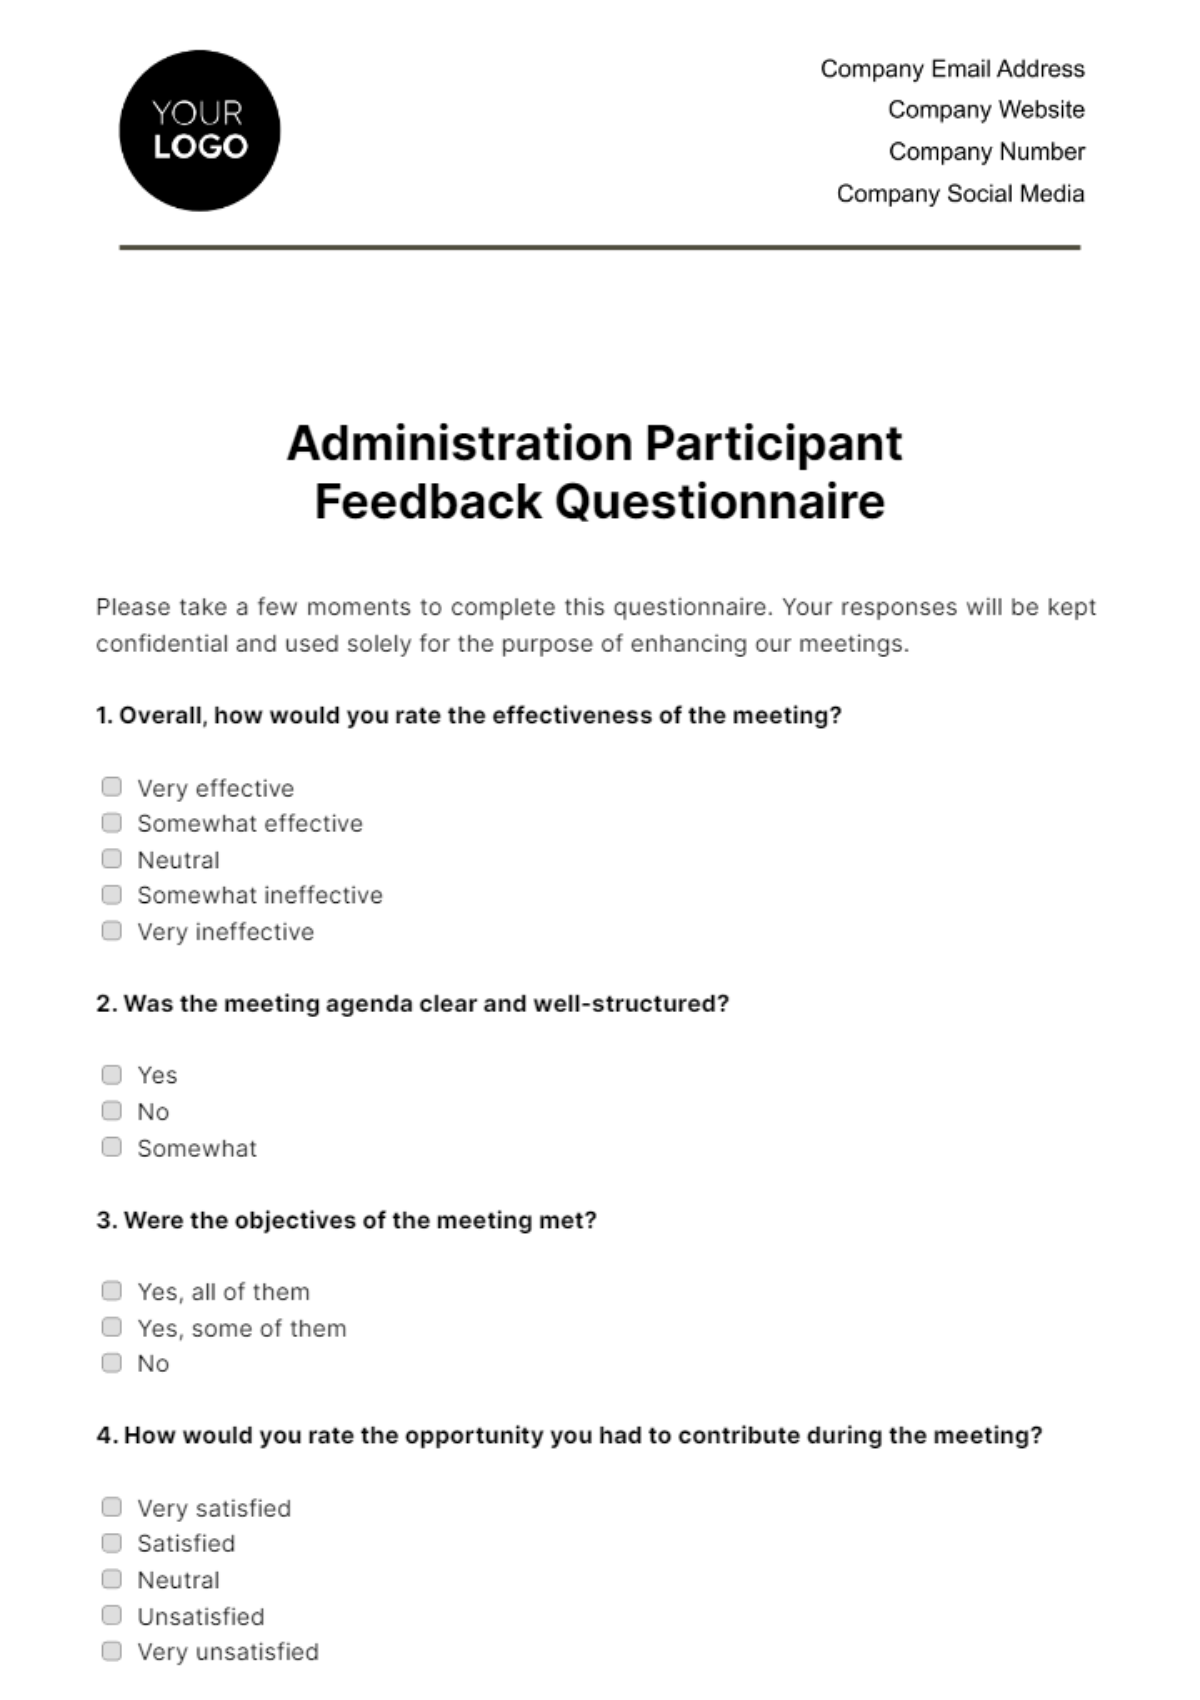 Administration Participant Feedback Questionnaire Template